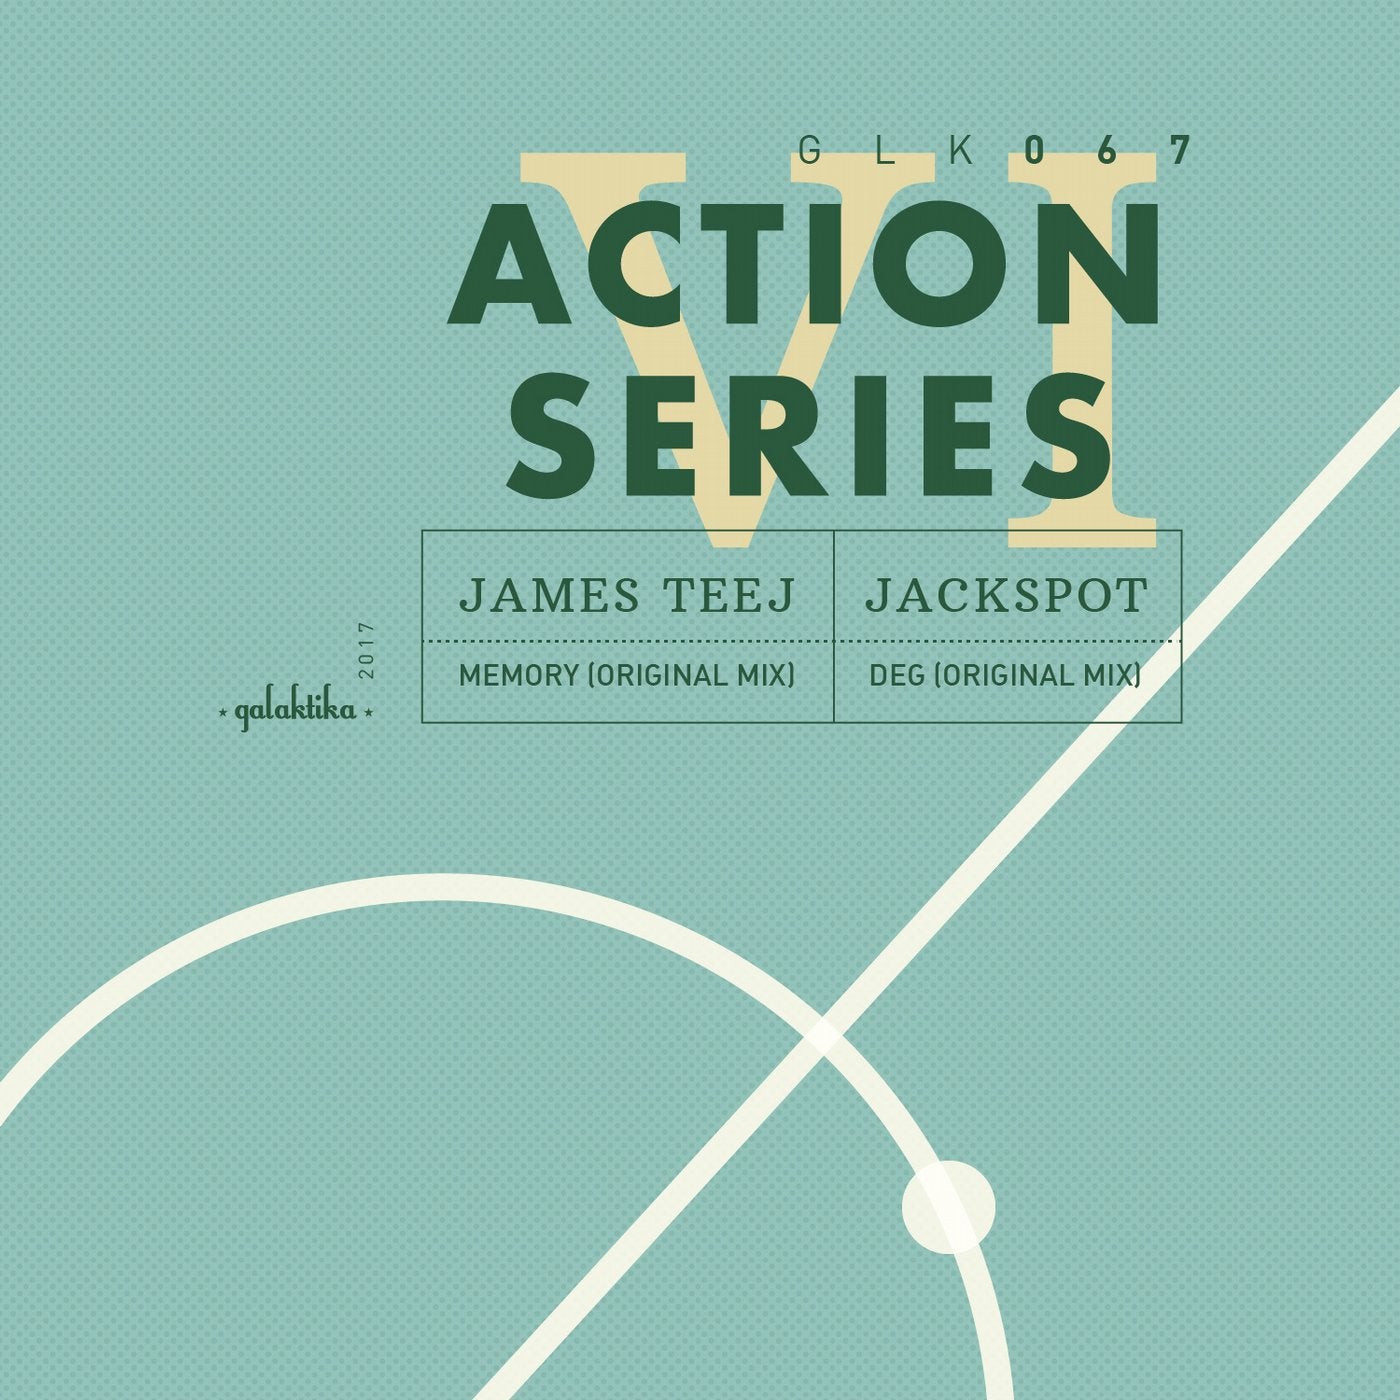 Action Series IV